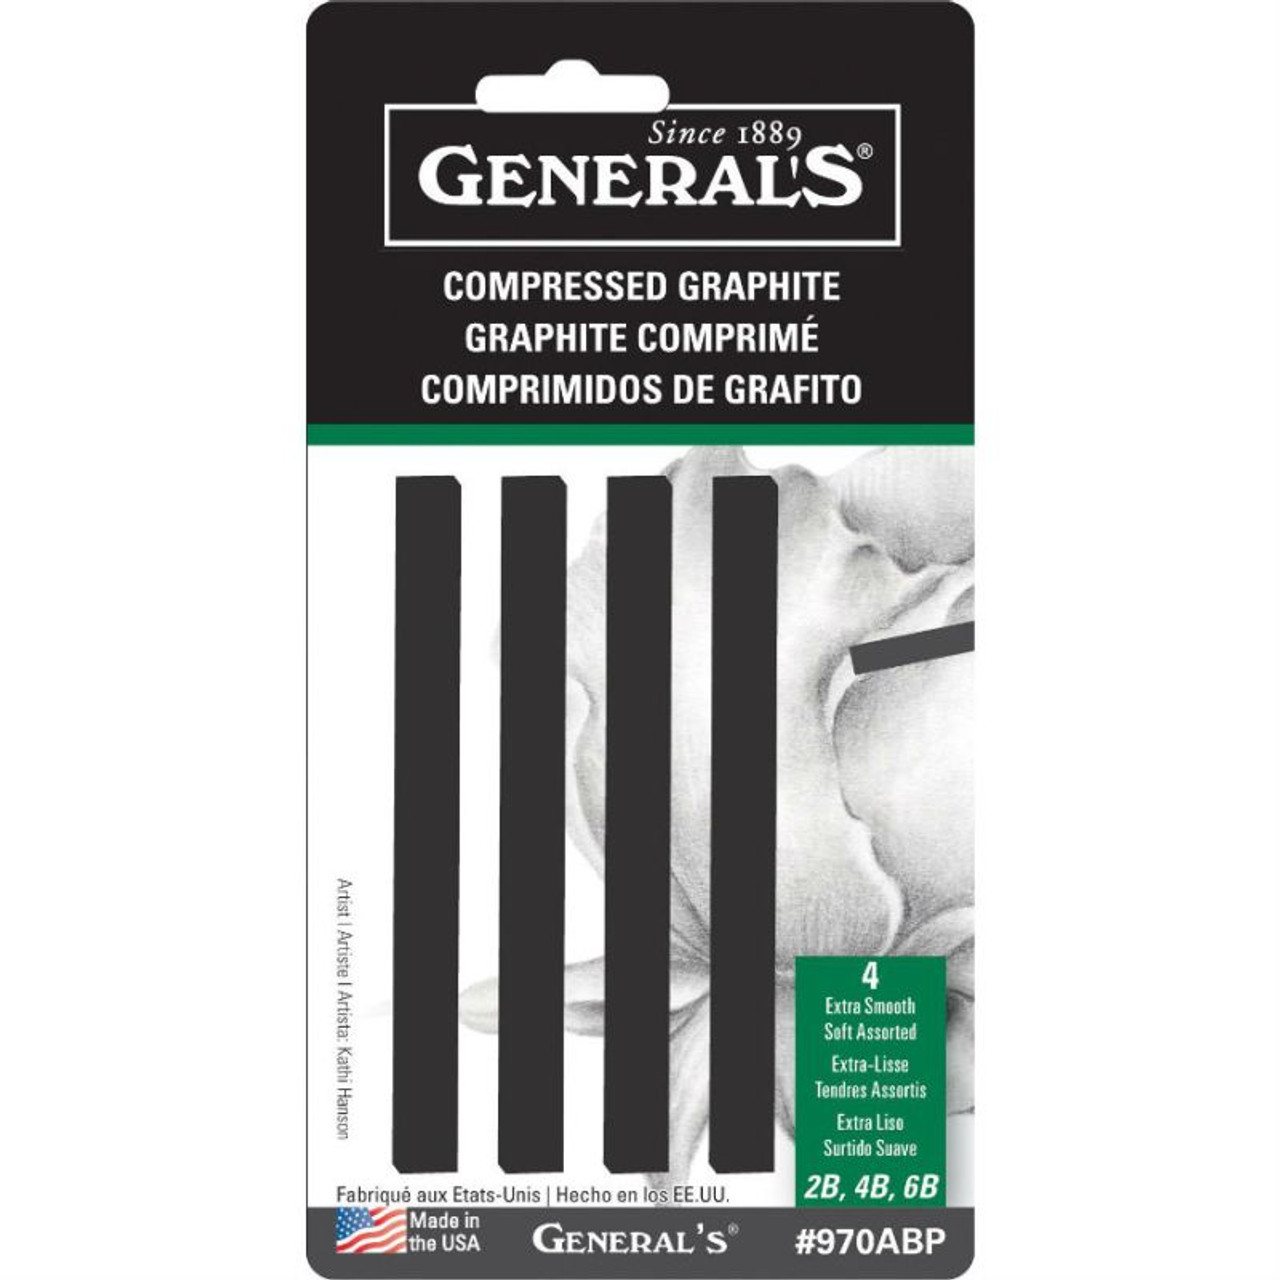 Big Lot of General's Kimberly Compressed Graphite Square Art